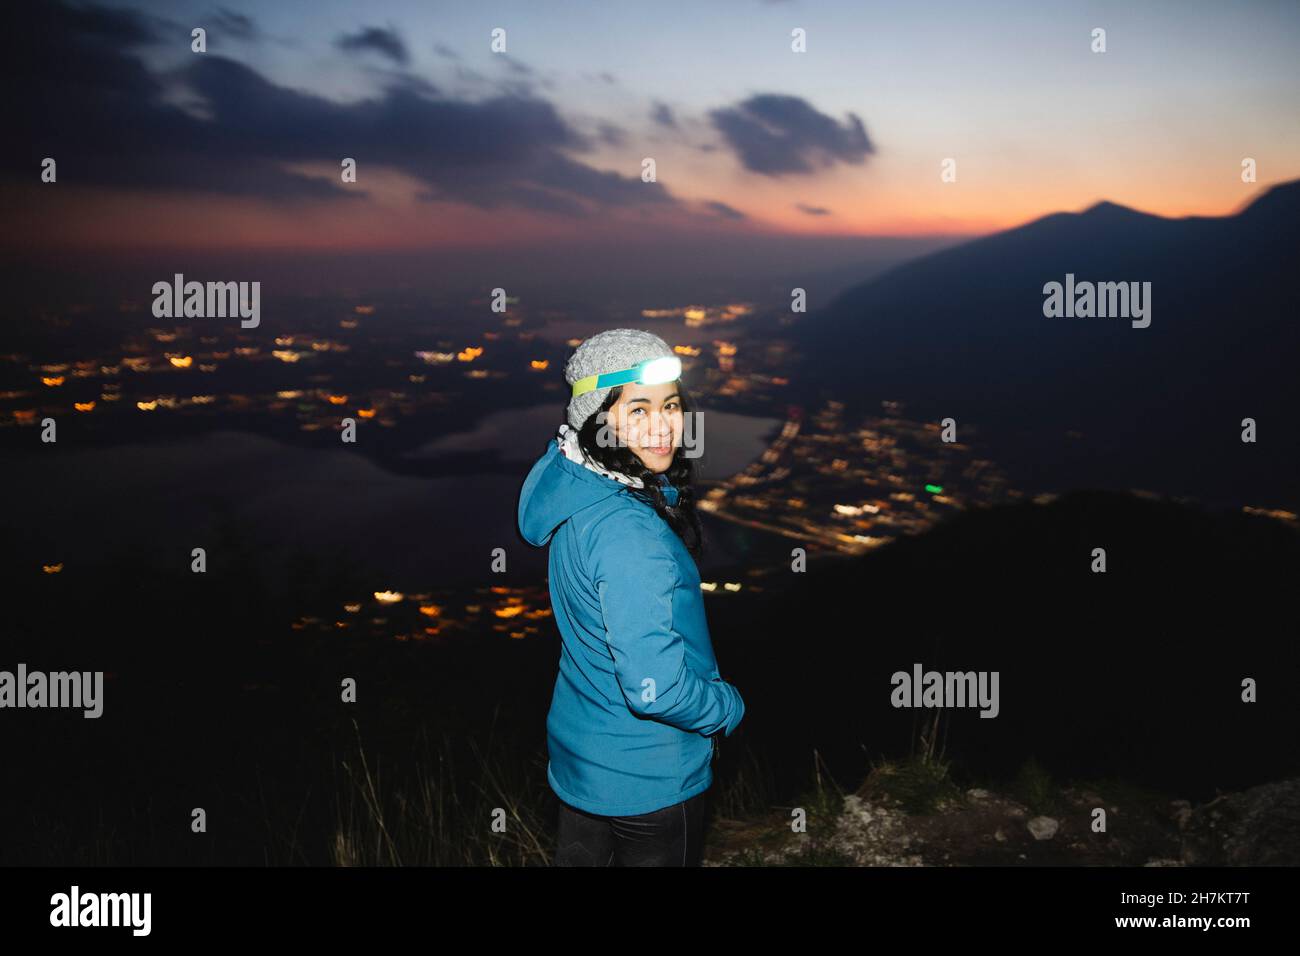 Hiker wearing head torch smiling on mountain Stock Photo